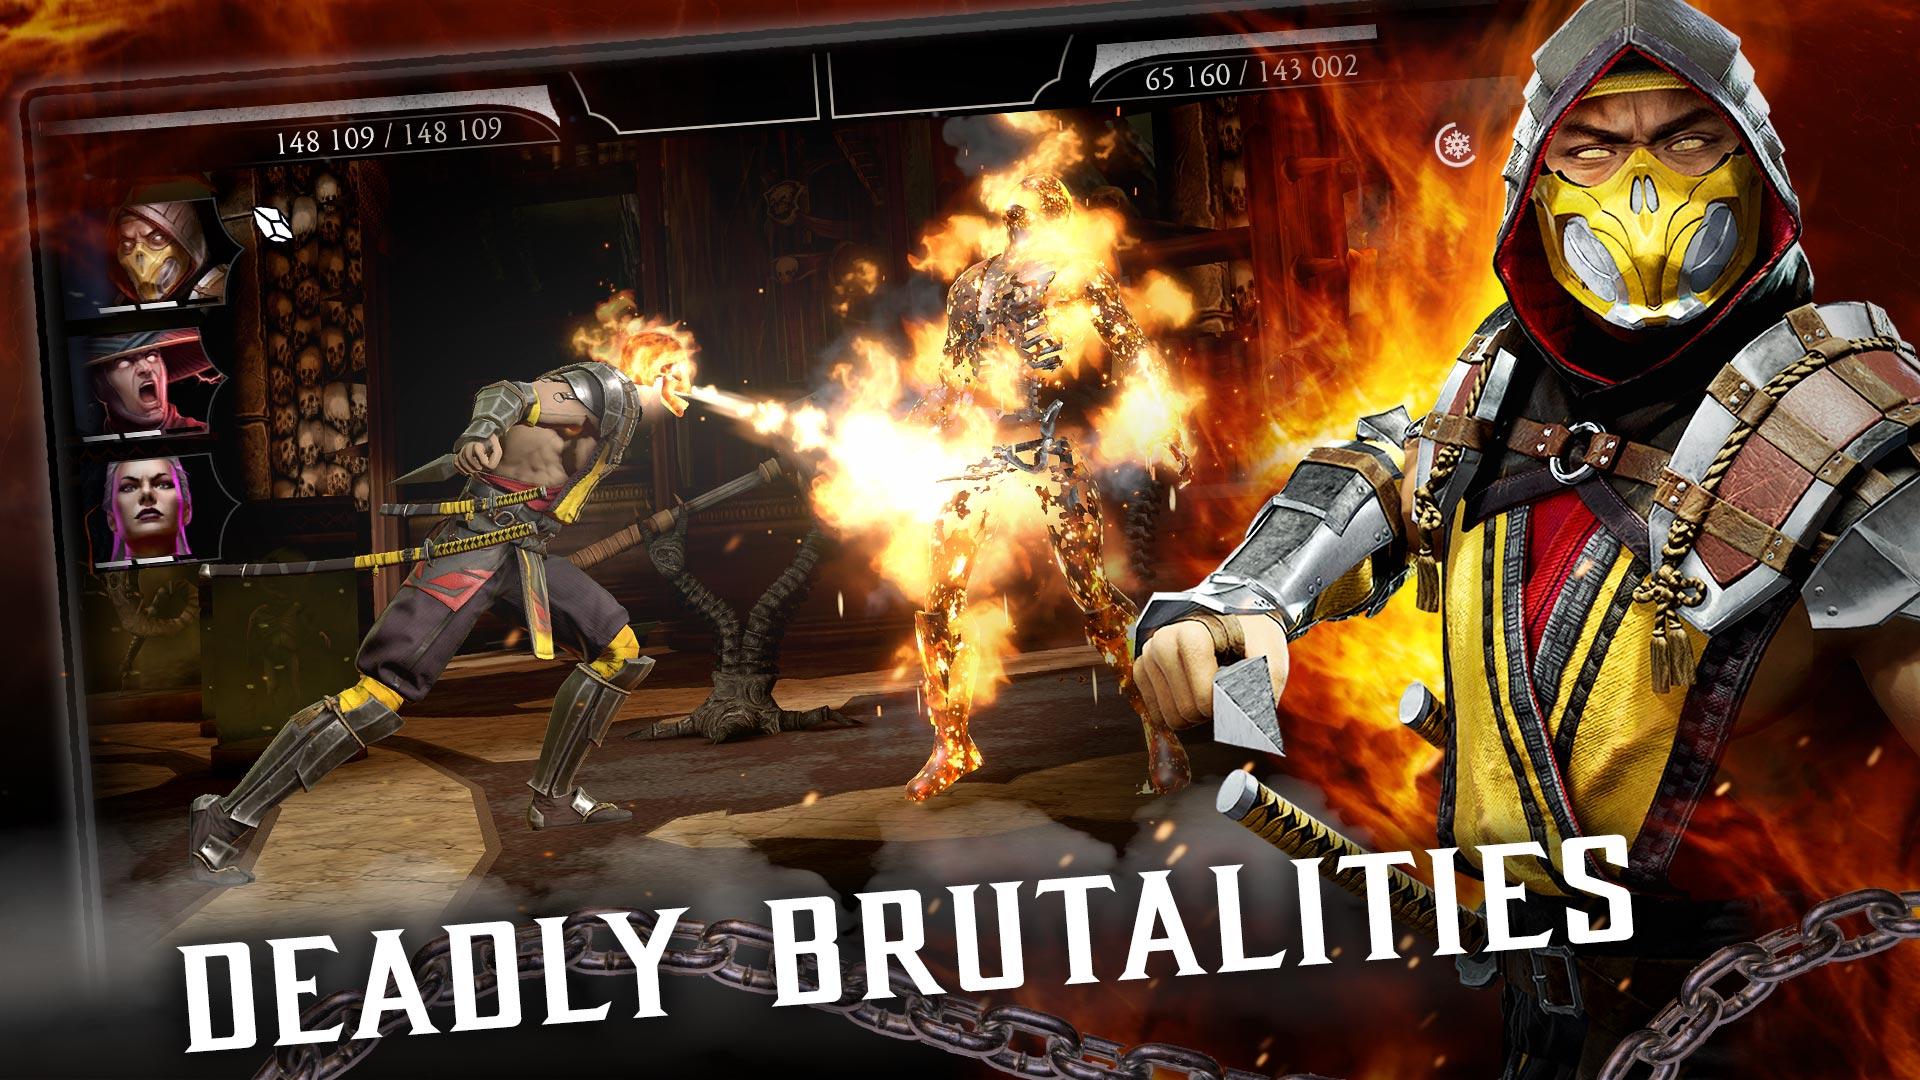 Mortal Kombat X Mobile Fan Community - Have you been having any of